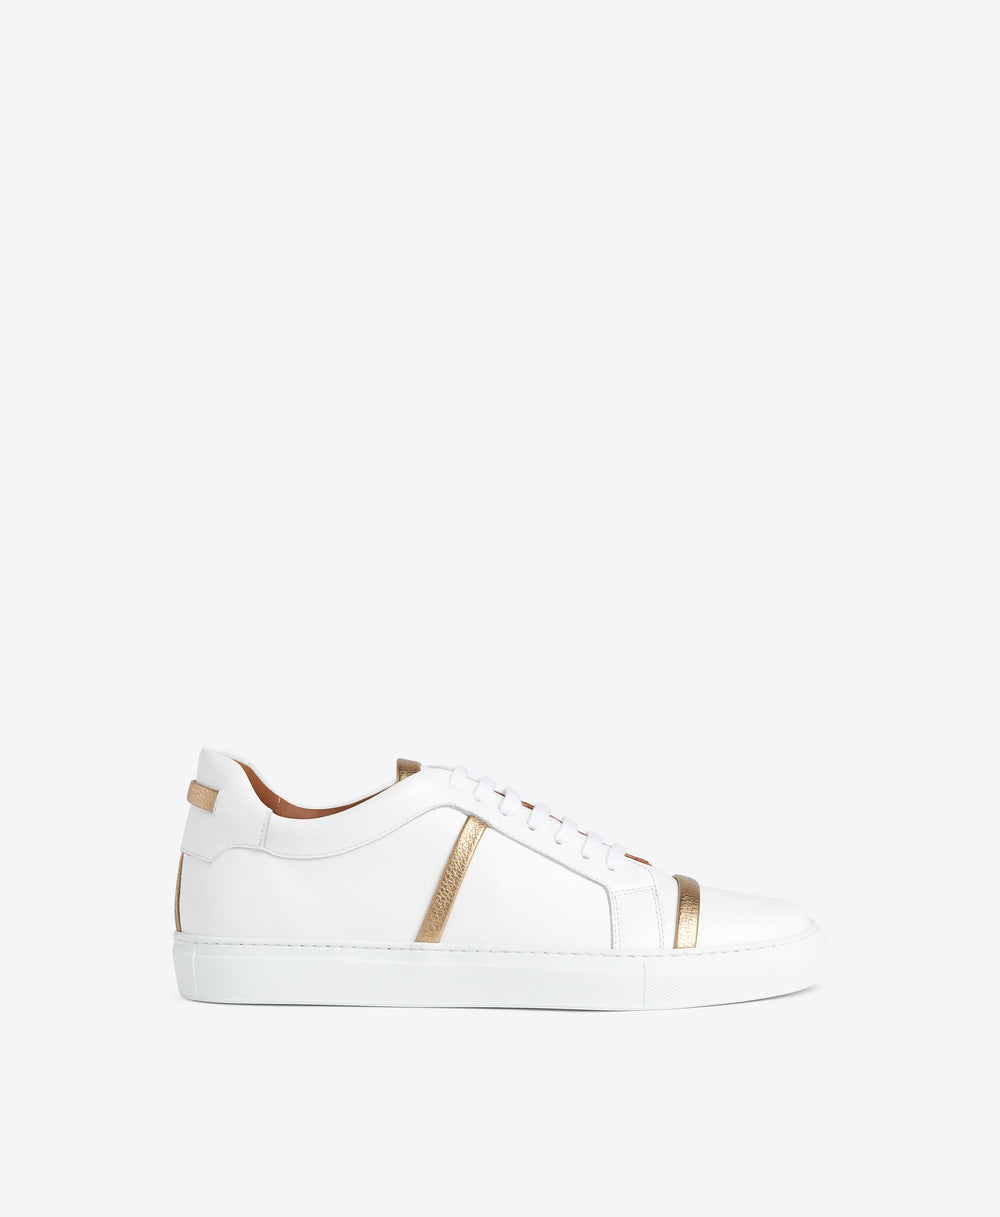 Men's Deon White and Gold Leather Sneakers Malone Souliers